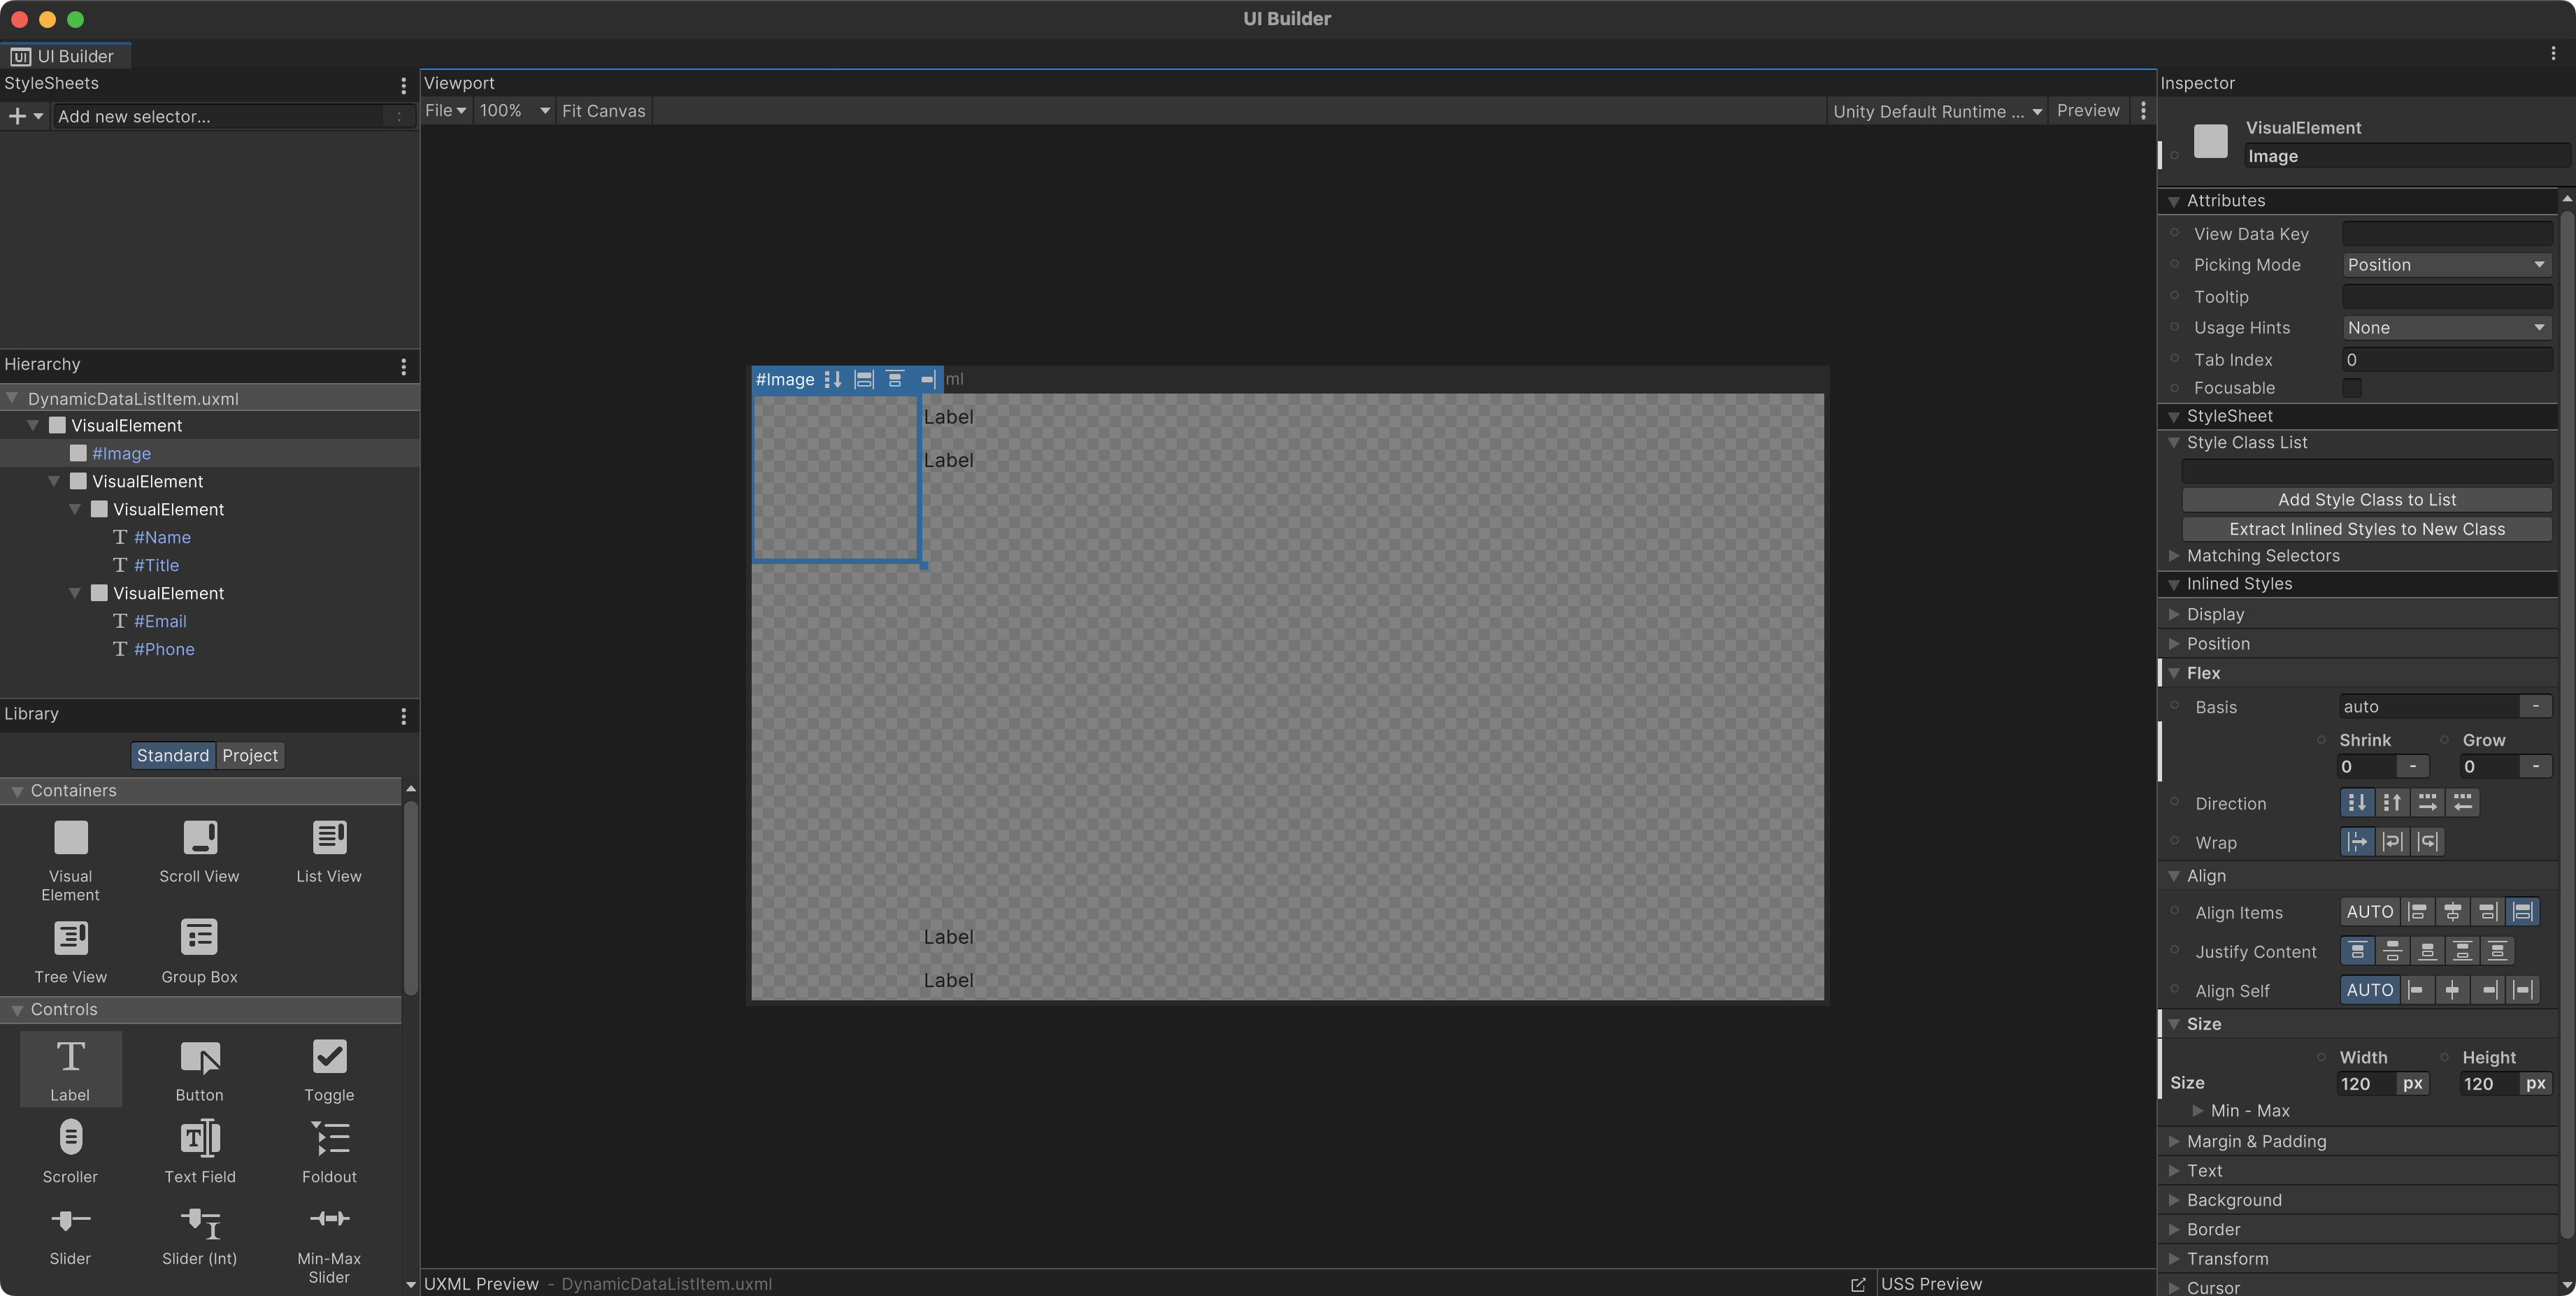 Screenshot of the UI Builder with a Visual Element with numerous child elements to make a complex UI.